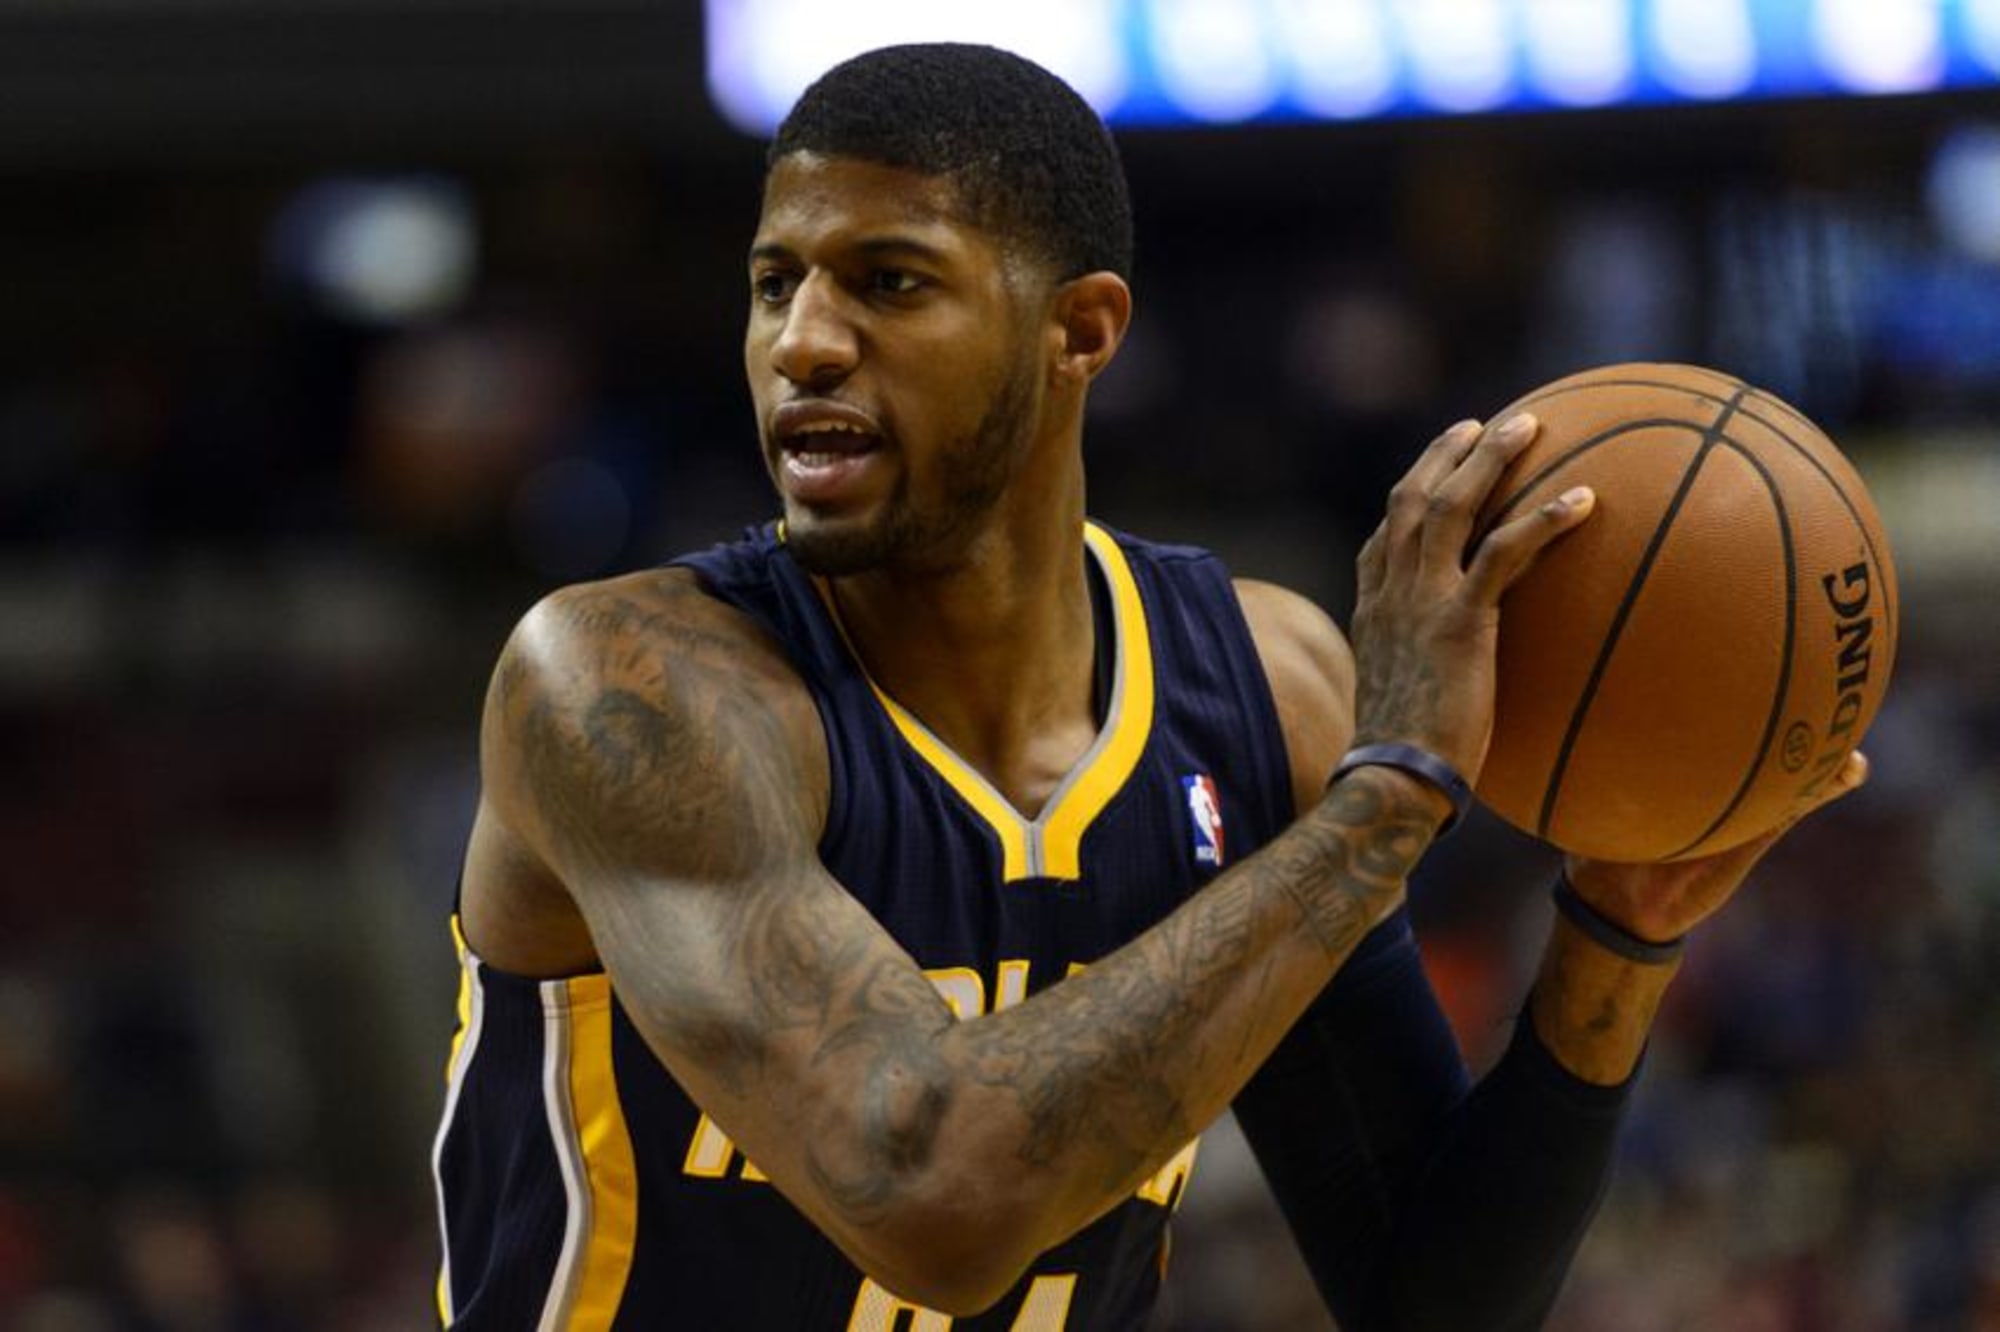 Paul George's offseason goal? To get more physical